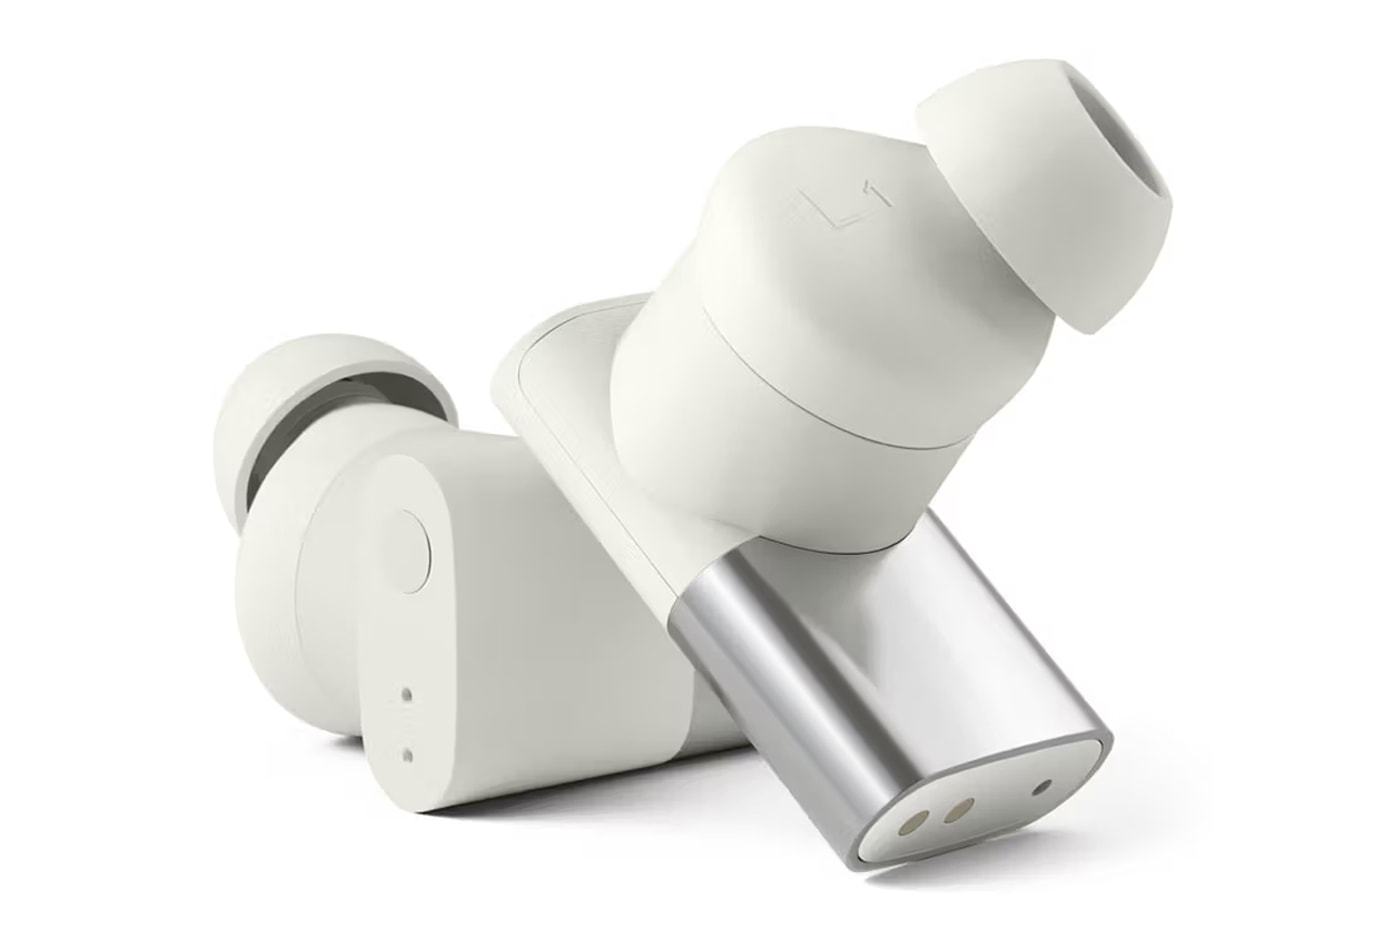 Status Audio's Between 3ANC Wireless Earbuds Look to Bring Audiophile Quality to the Masses